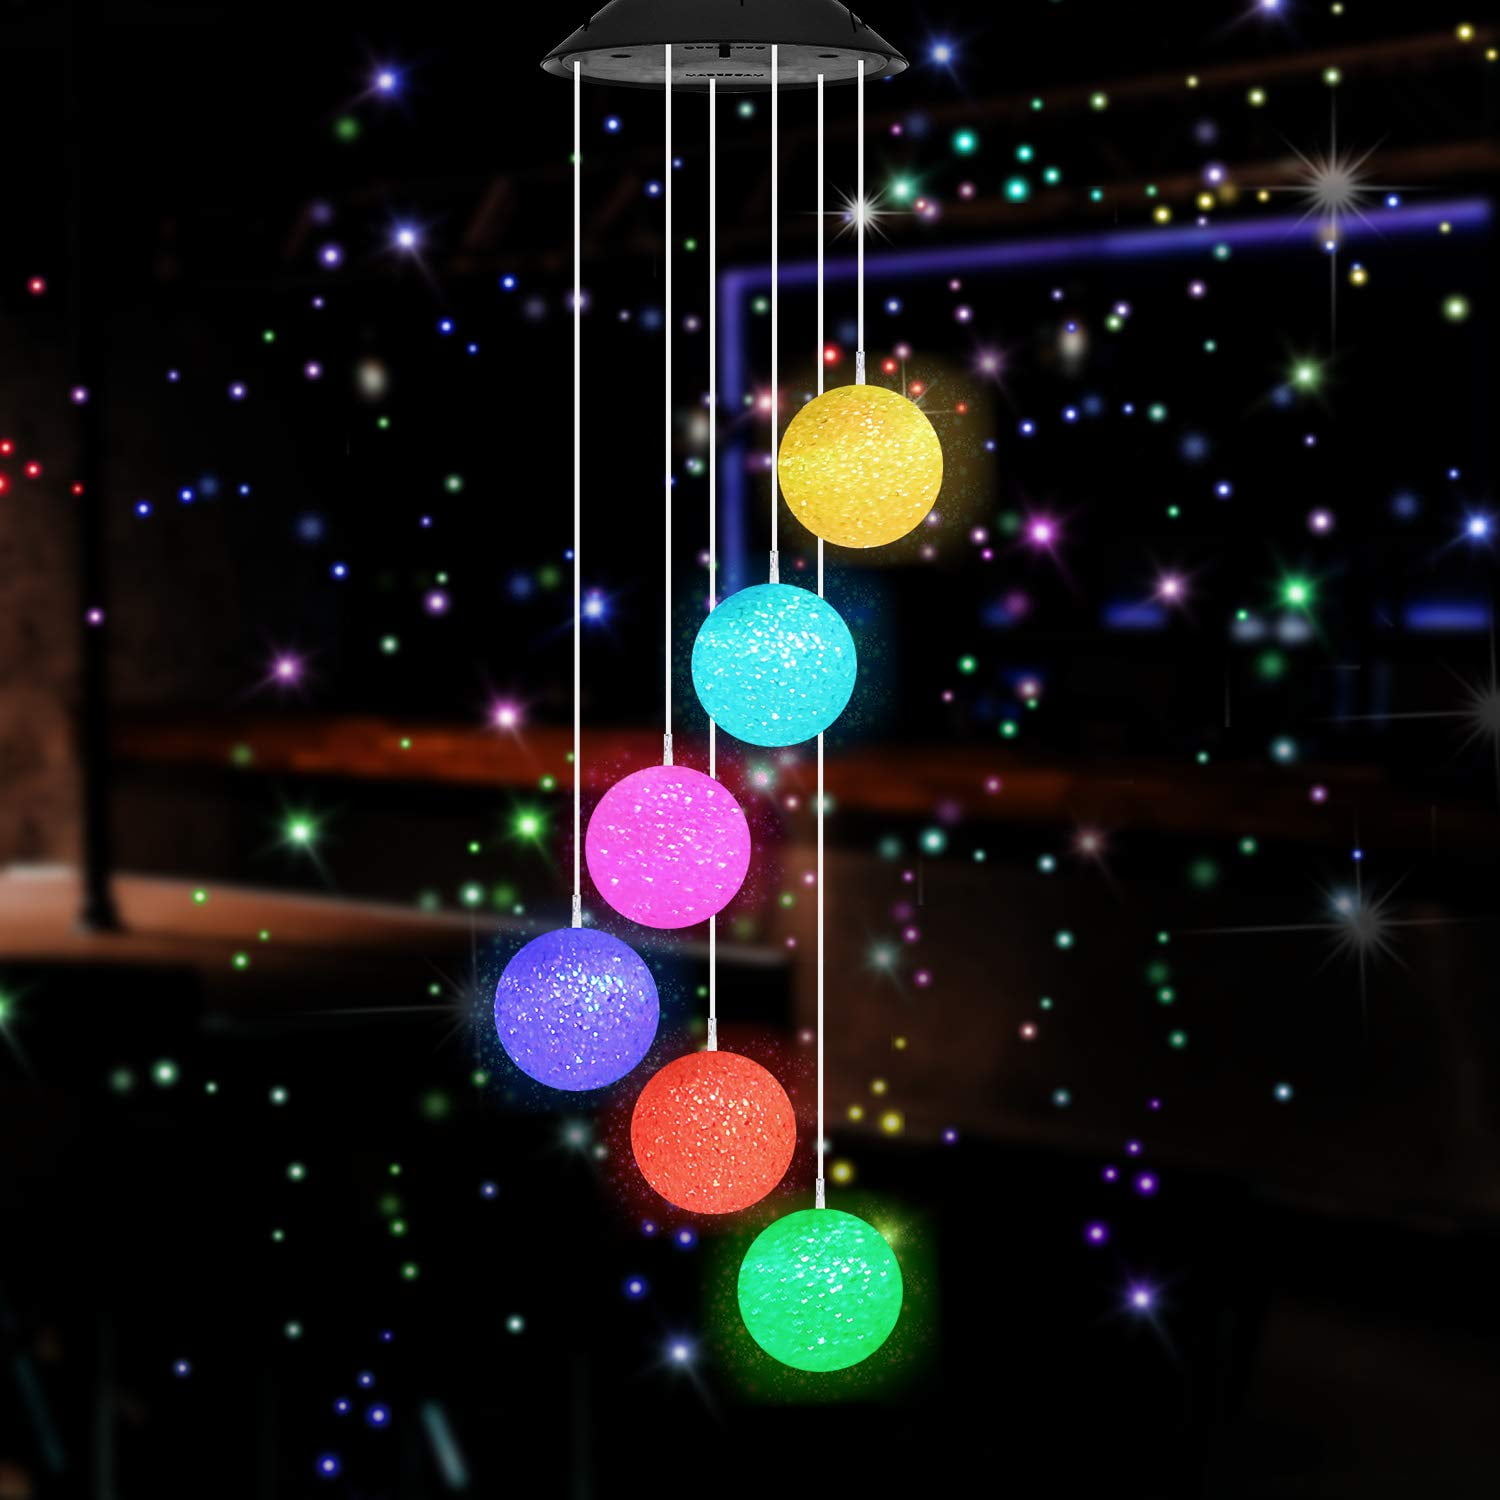 LED Solar Powered Sea Urchin Wind Chimes Light Home Garden Hanging Lamp Decor Portable Color Outdoor Decorative Windbell Light for Garden Patio Yard Deck Multicolor